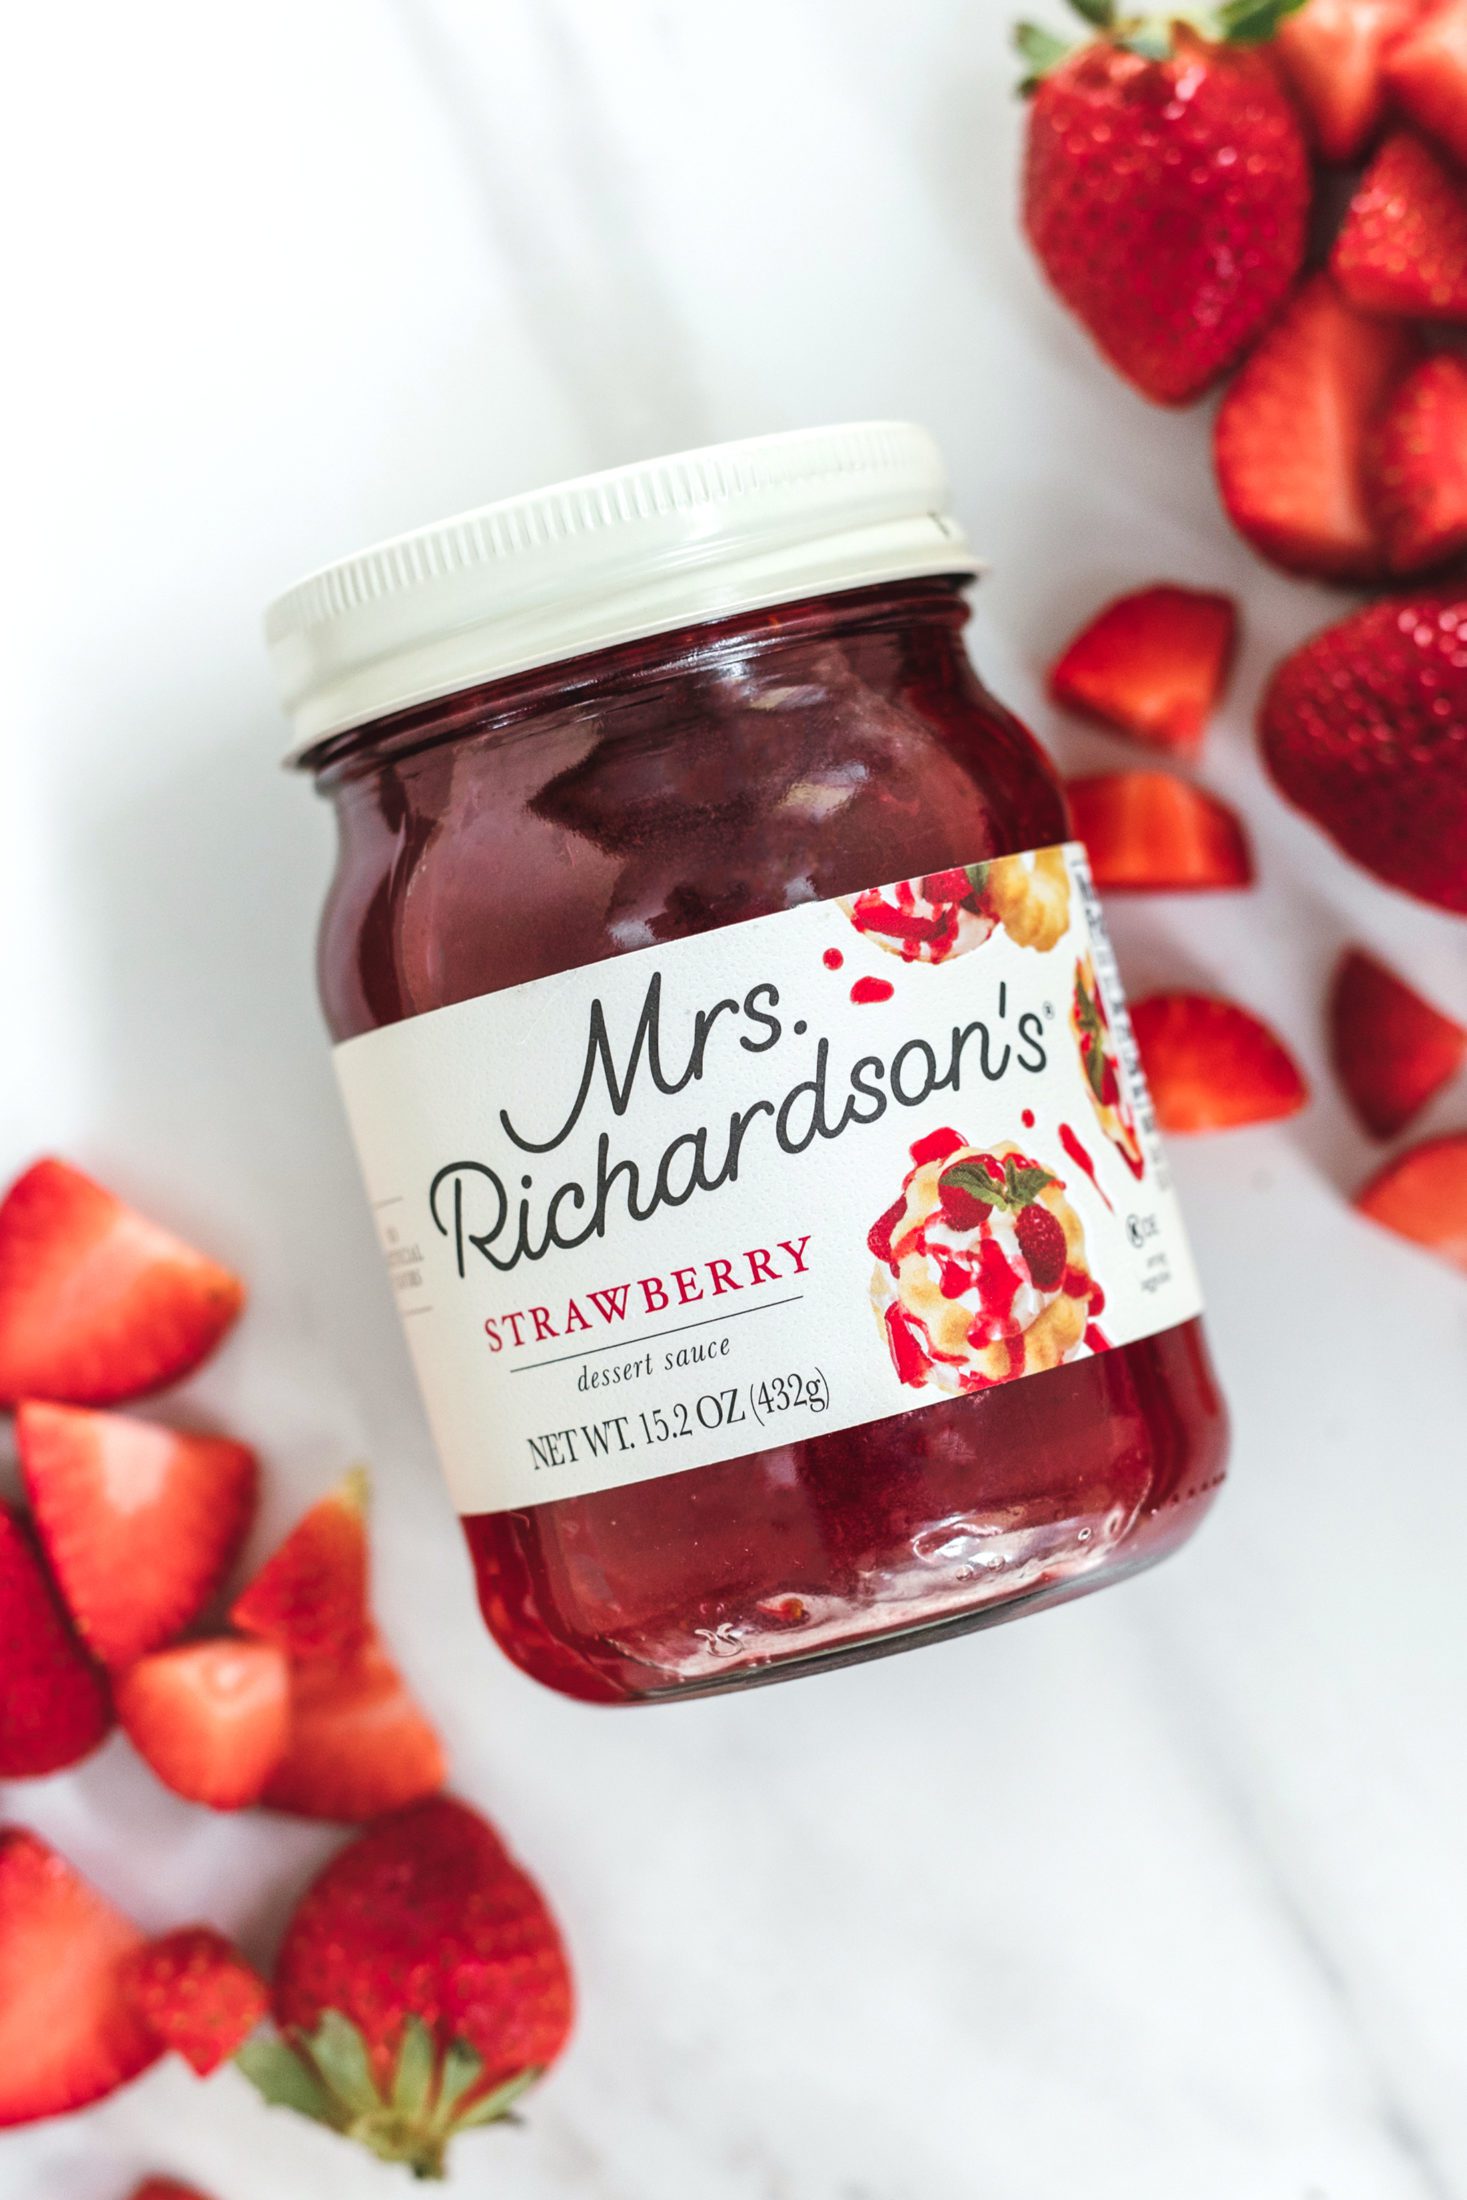 An overhead view of new Mrs. Richardson's cream label design using a clear glass jar with cream white lid. Strawberry dessert sauce jar with chopped strawberries on a marble surface.